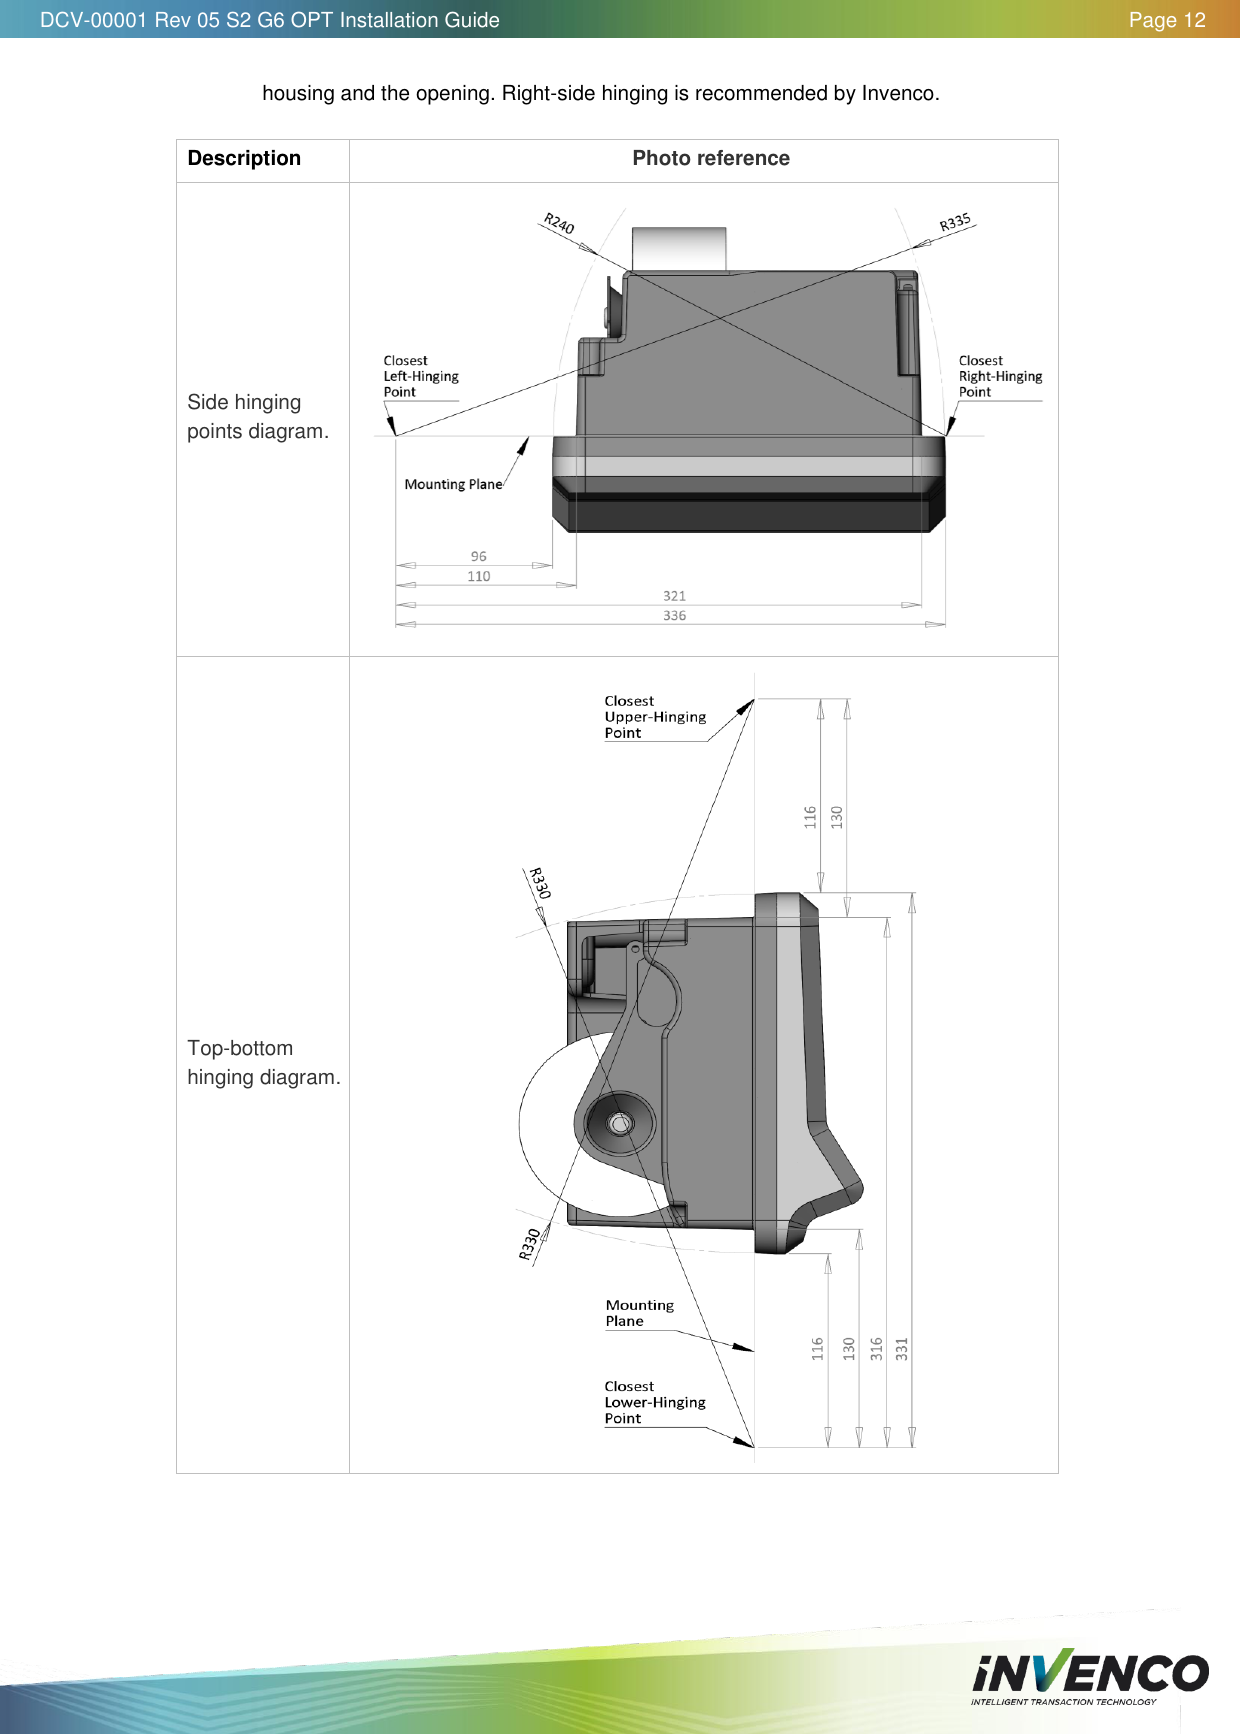   DCV-00001 Rev 05 S2 G6 OPT Installation Guide    Page 12  housing and the opening. Right-side hinging is recommended by Invenco.  Description Photo reference Side hinging points diagram.  Top-bottom hinging diagram.      